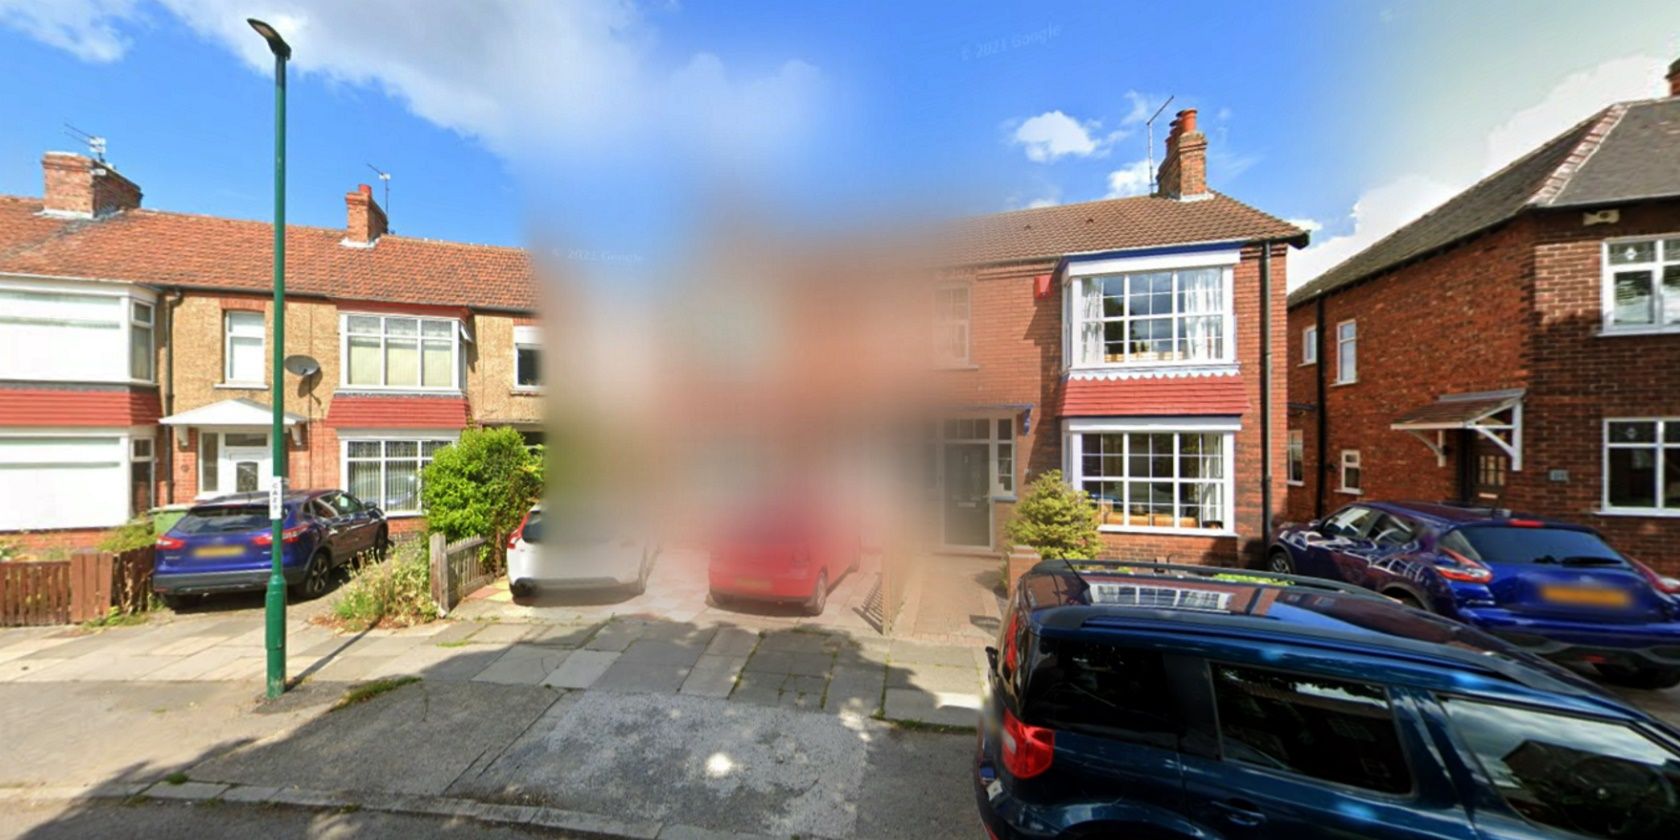 Blurred house on Google Maps Street View